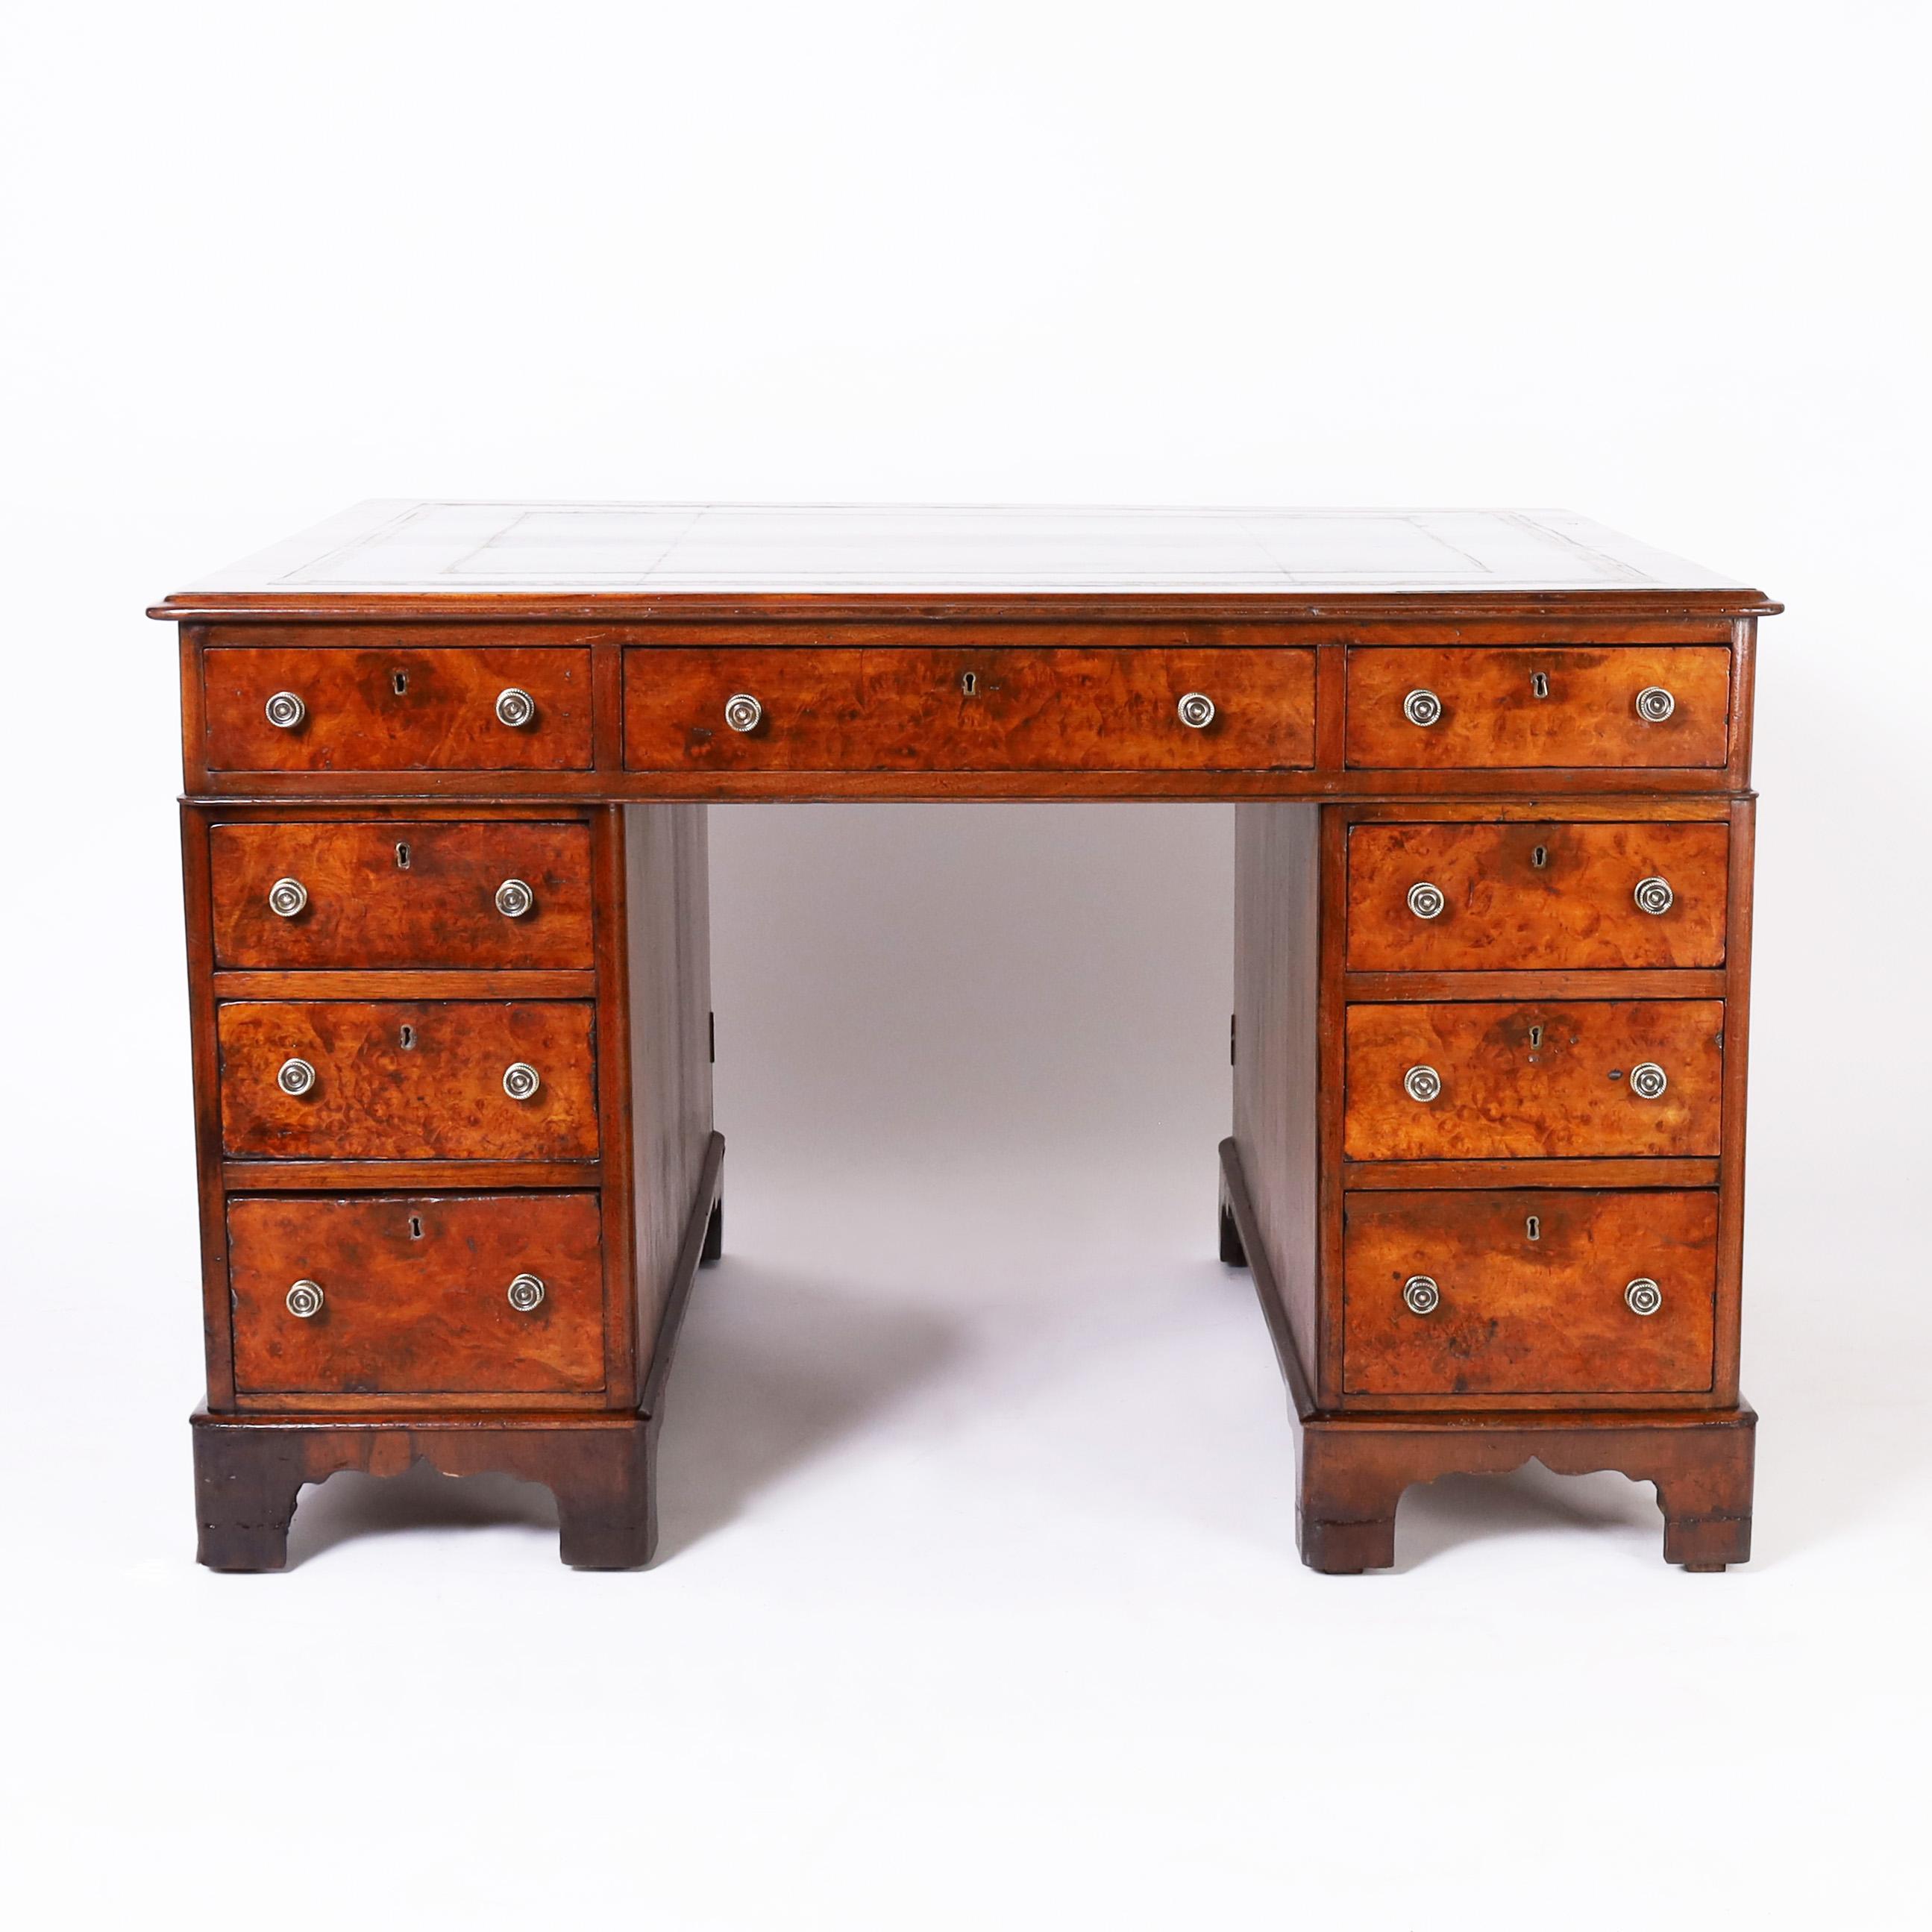 Handsome 19th century English partners desk crafted in mahogany in three-piece construction, featuring the original tooled leather top, African Bubinga wood drawer and door fronts, brass hardware and bracket feet.